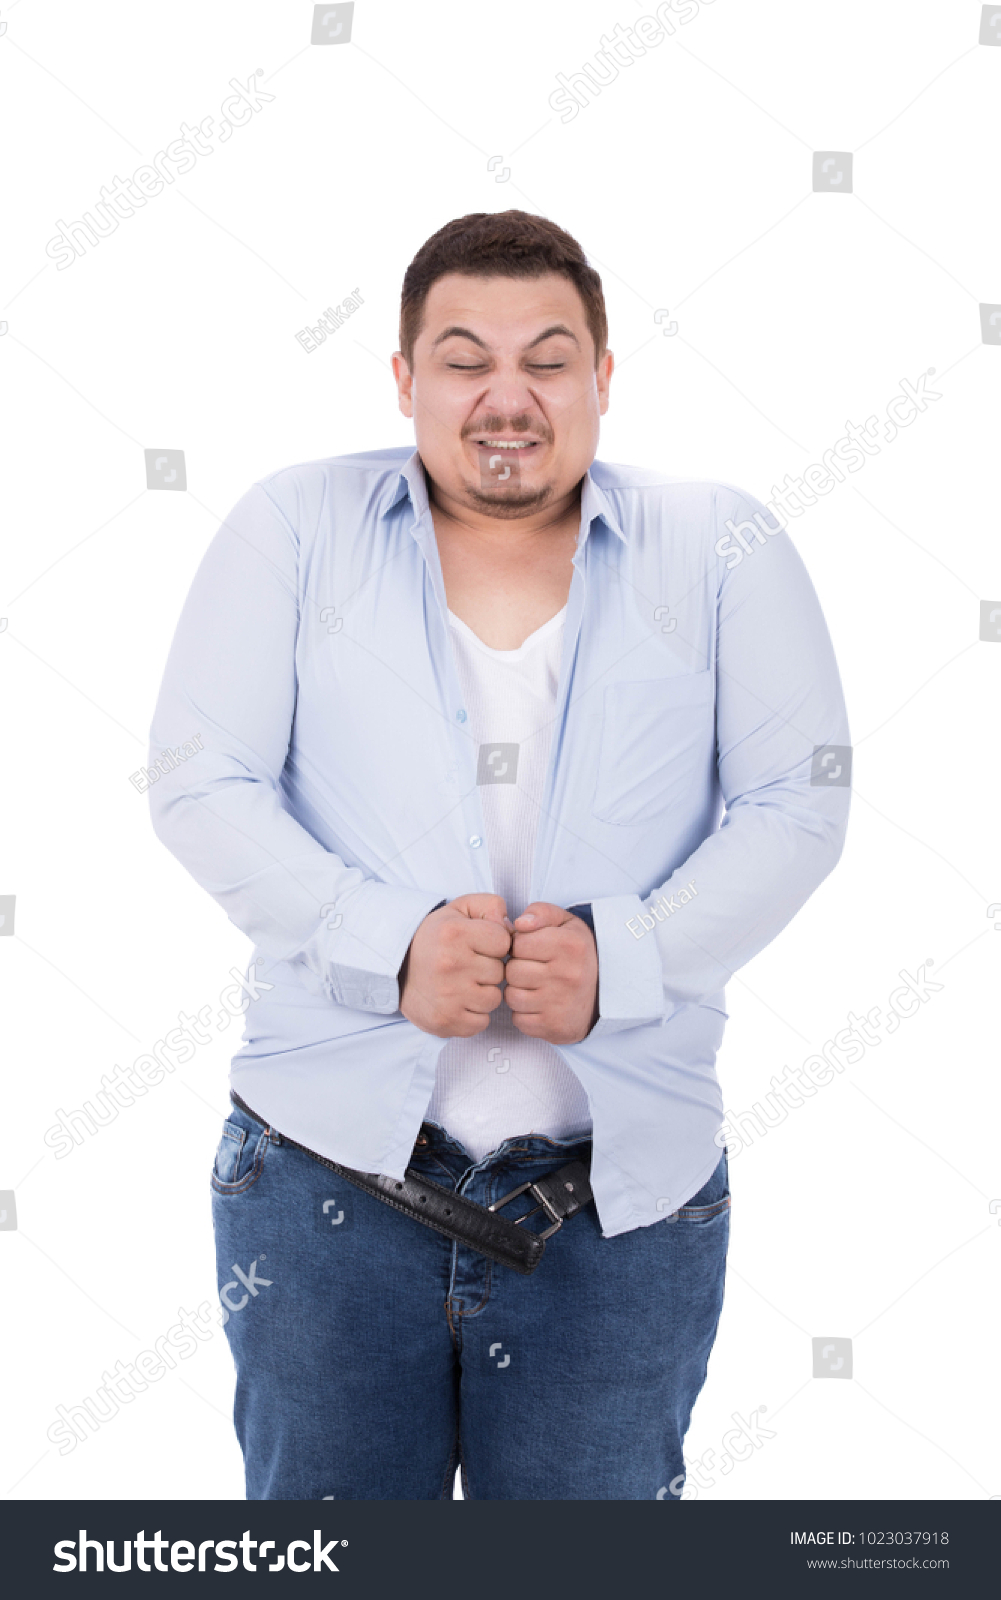 5,868 Tight clothes man Images, Stock Photos & Vectors | Shutterstock